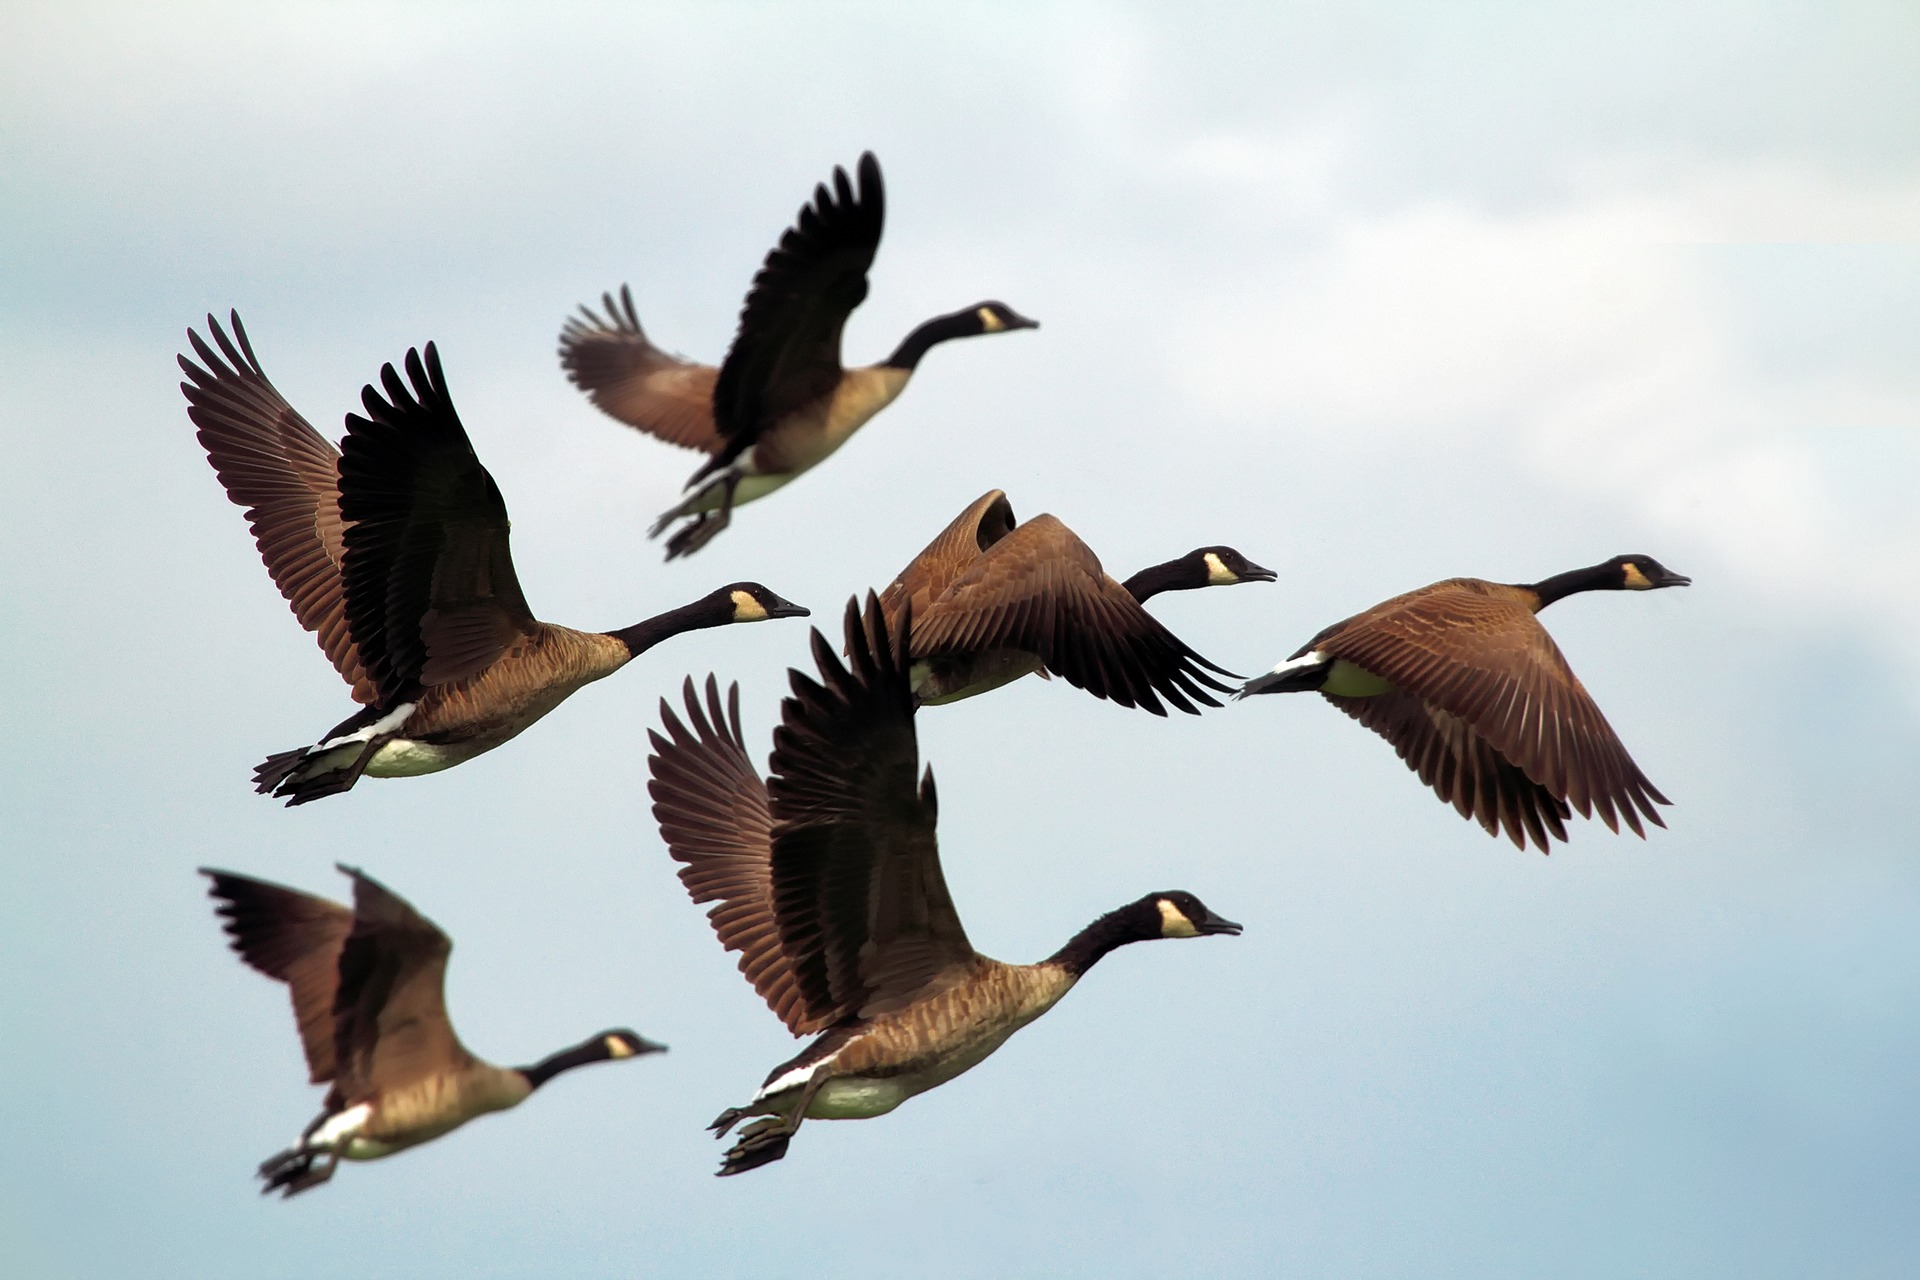 Canadian geese in mid-migration.